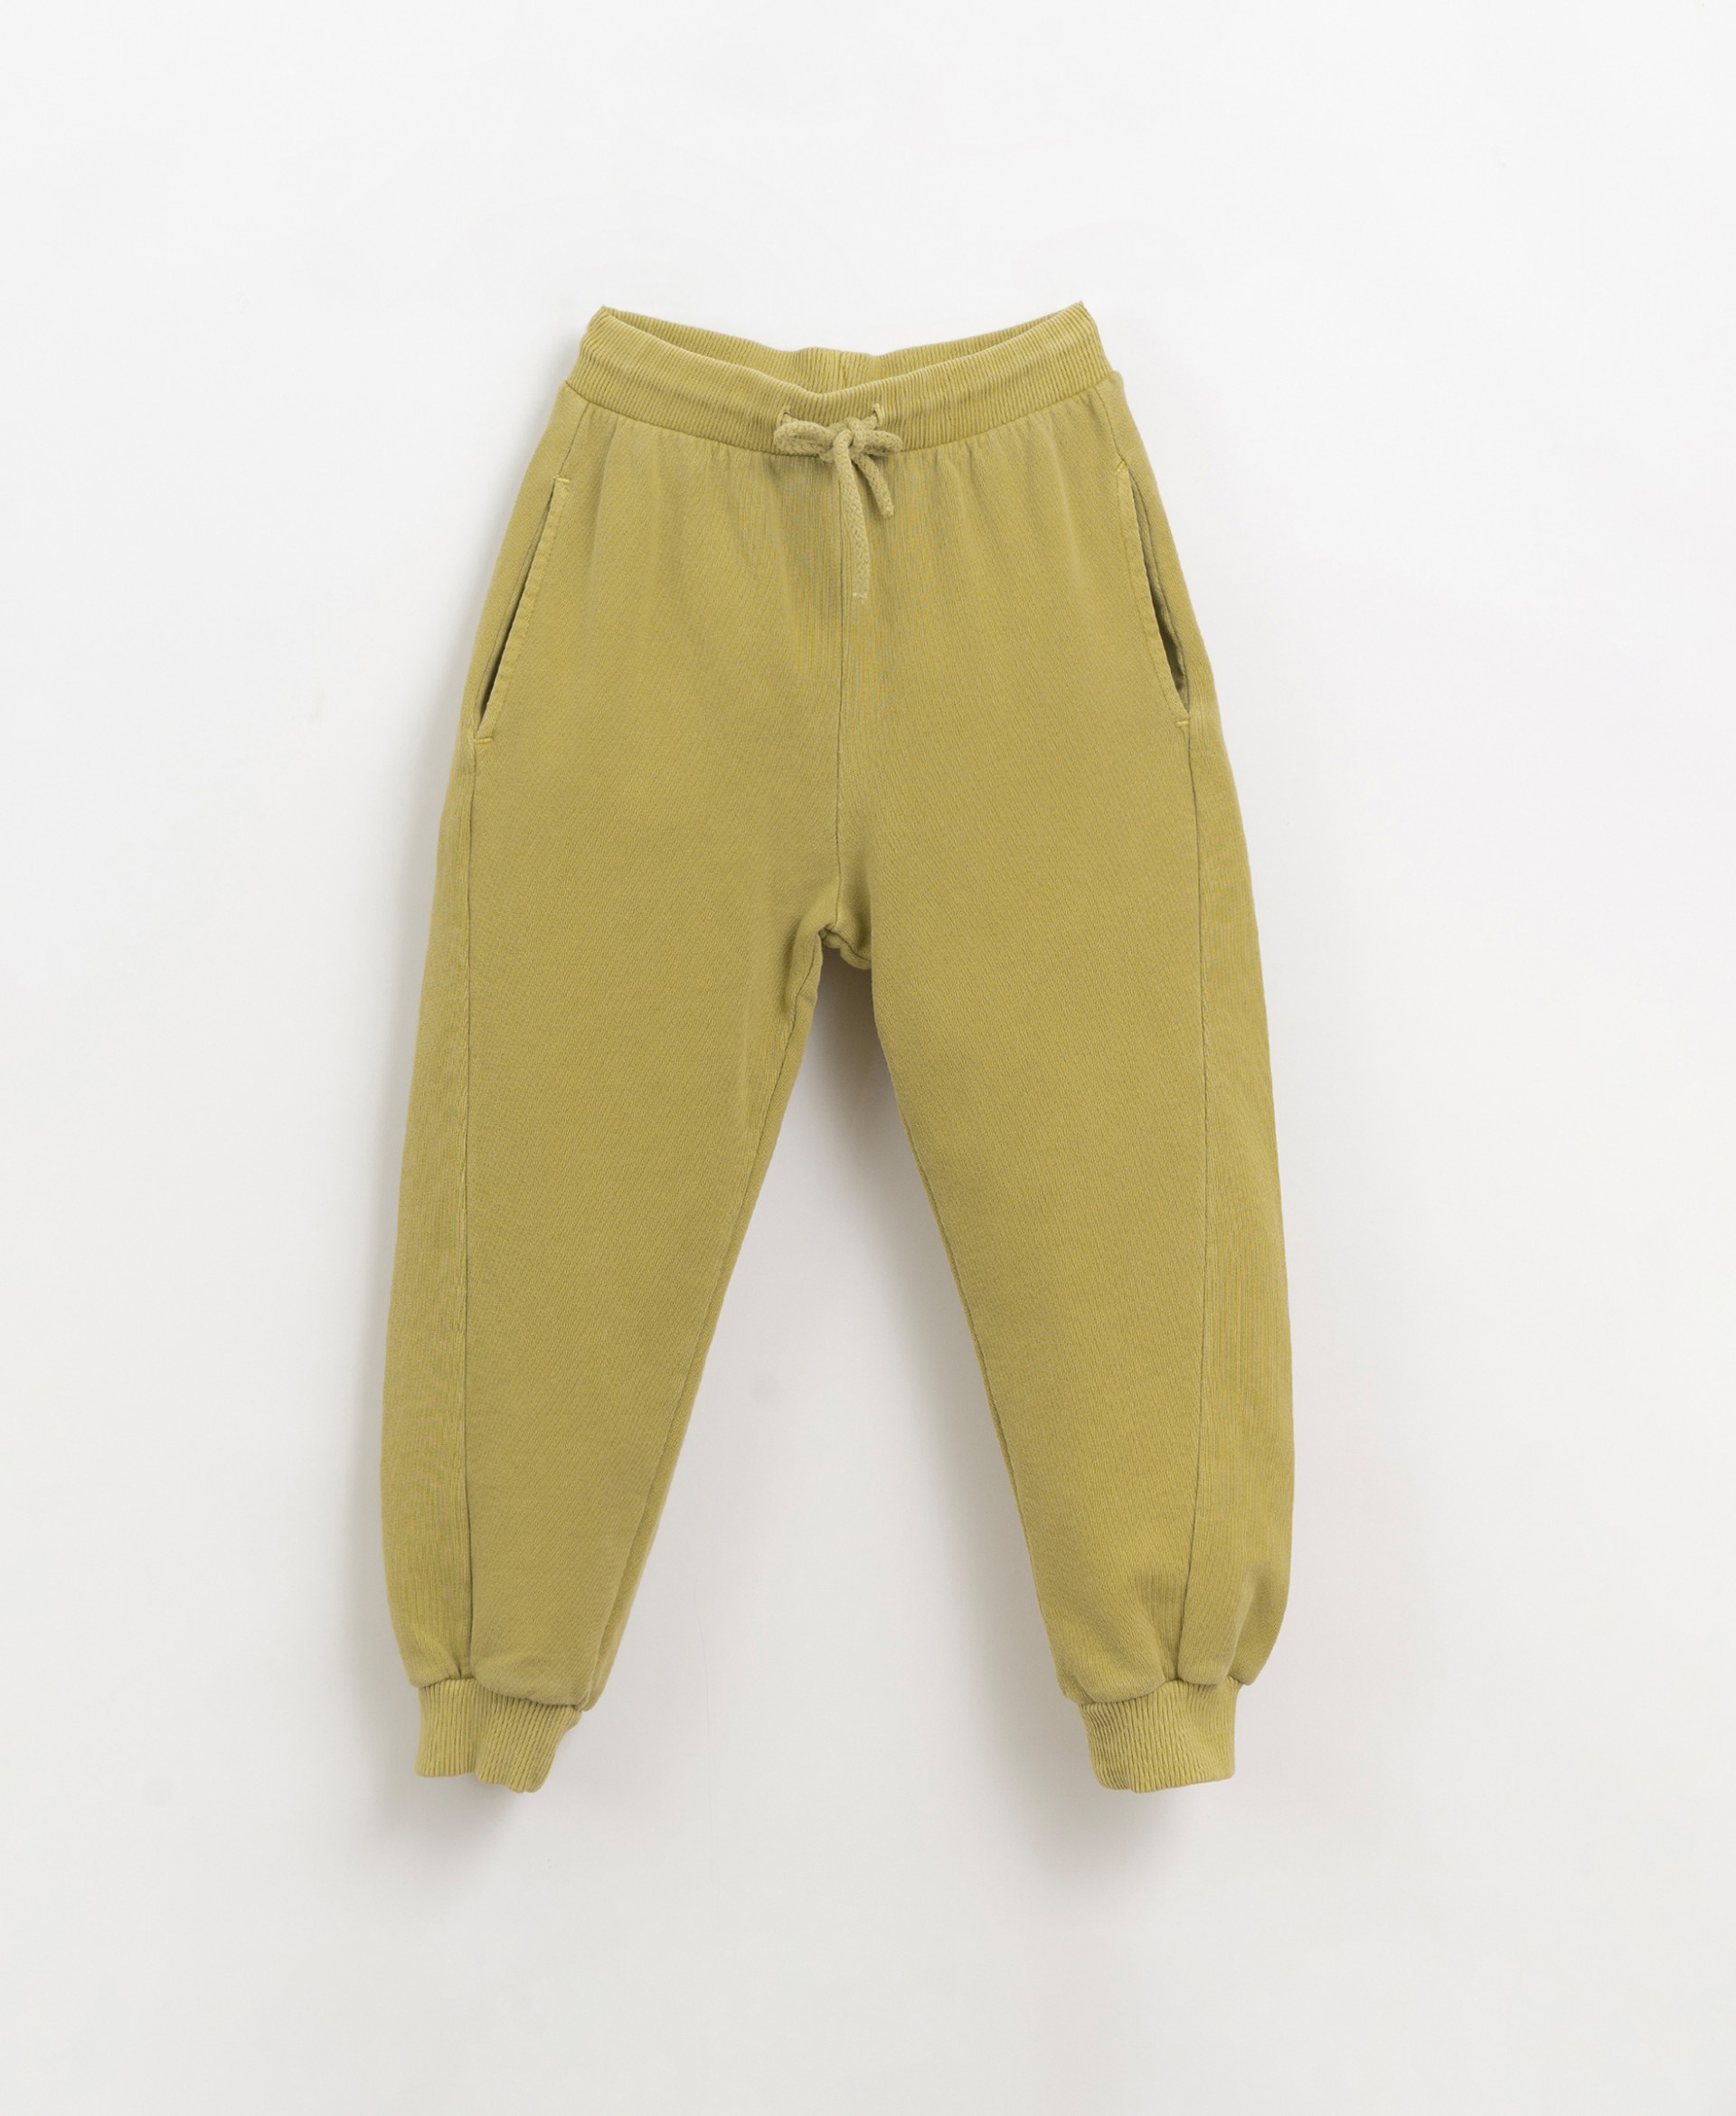 Jersey stitch trousers made of natural fibres | Organic Care